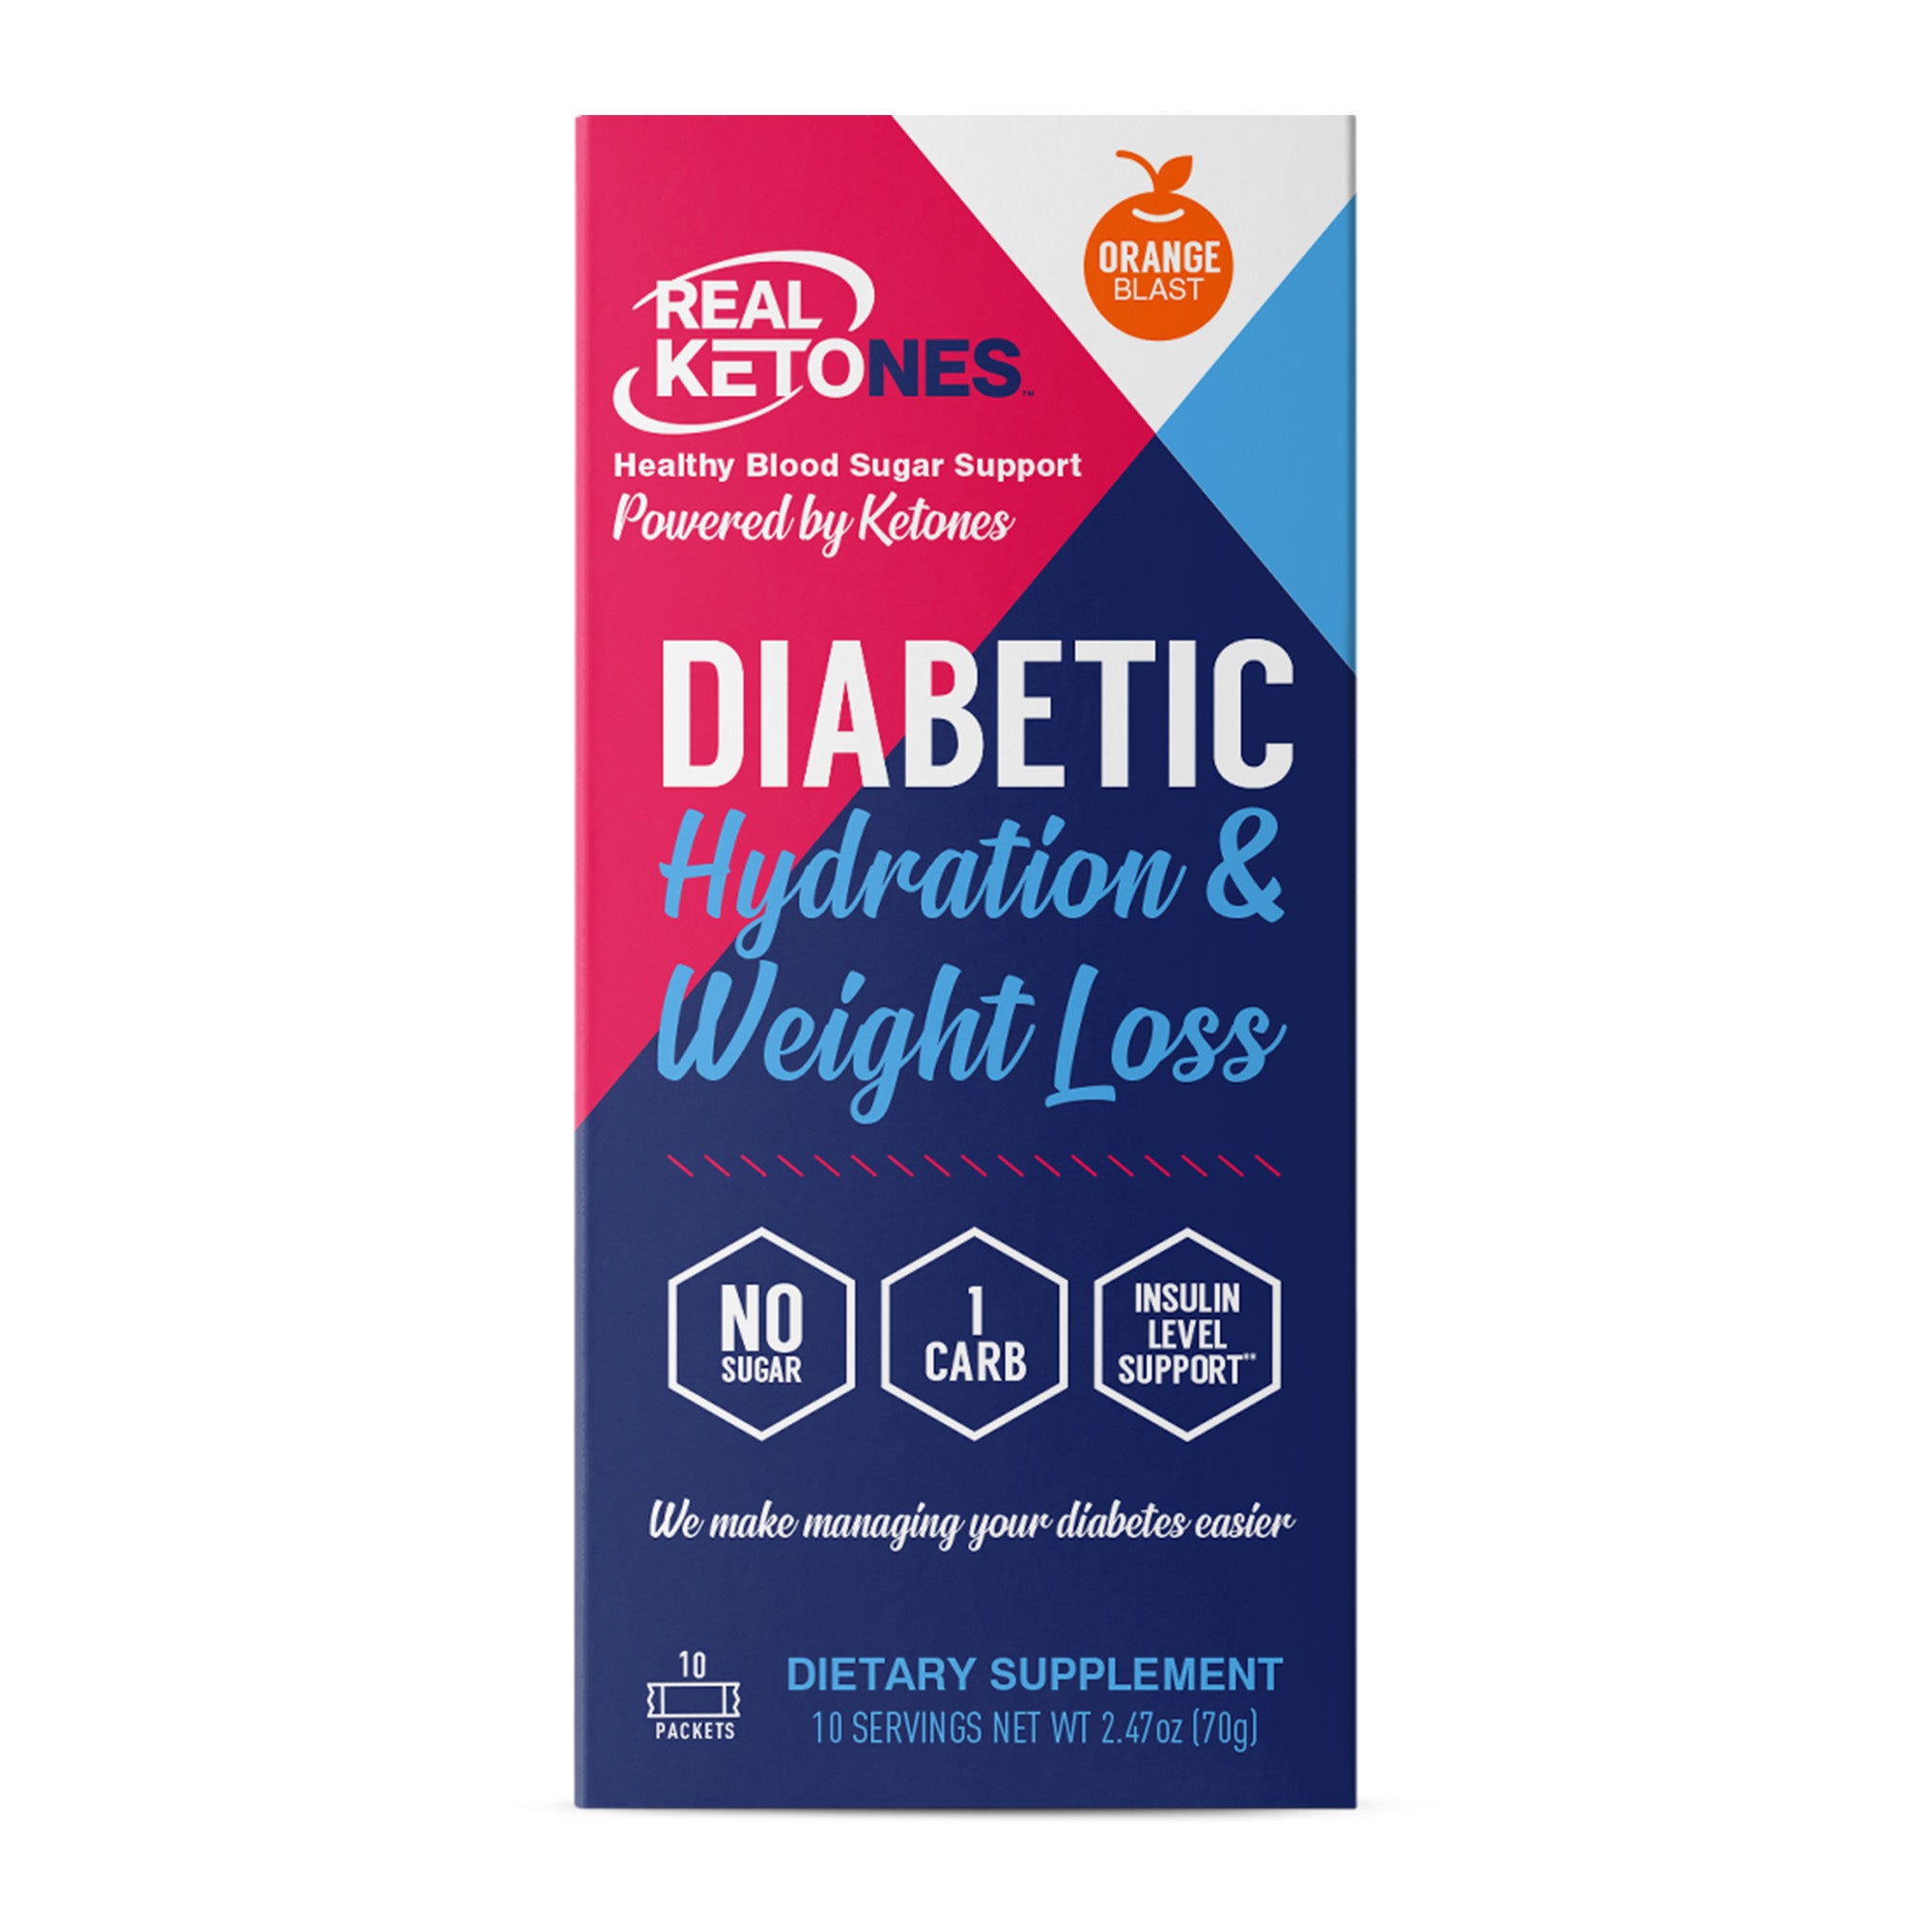 Diabetic Hydration & Weight Loss